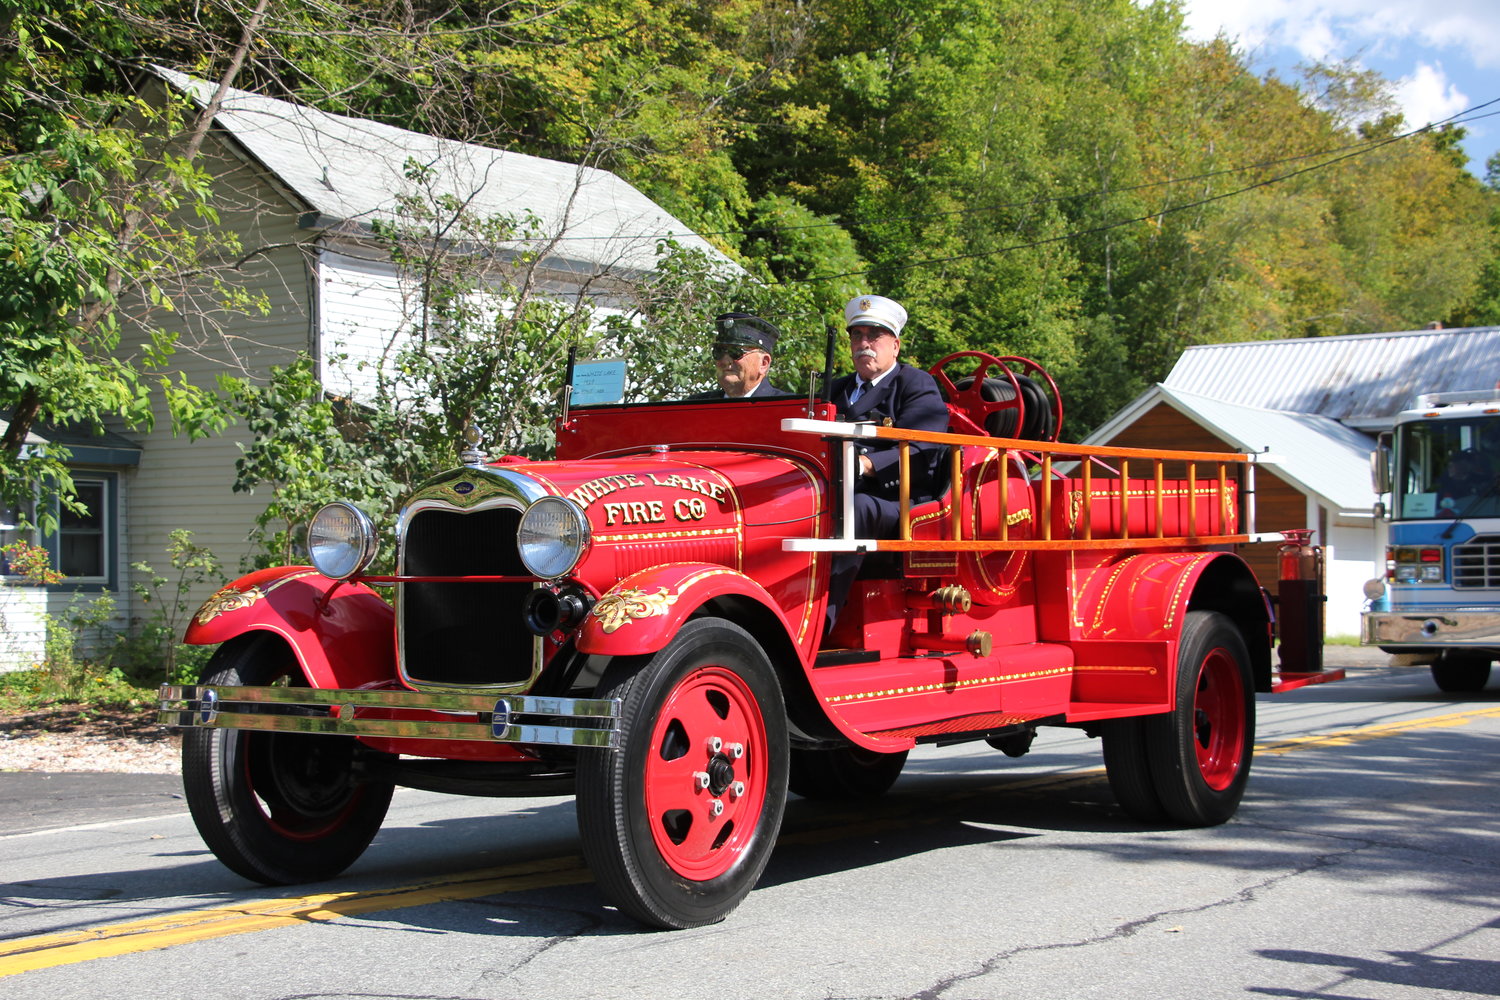 White Lake Fire Department brought their charming antique fire truck.